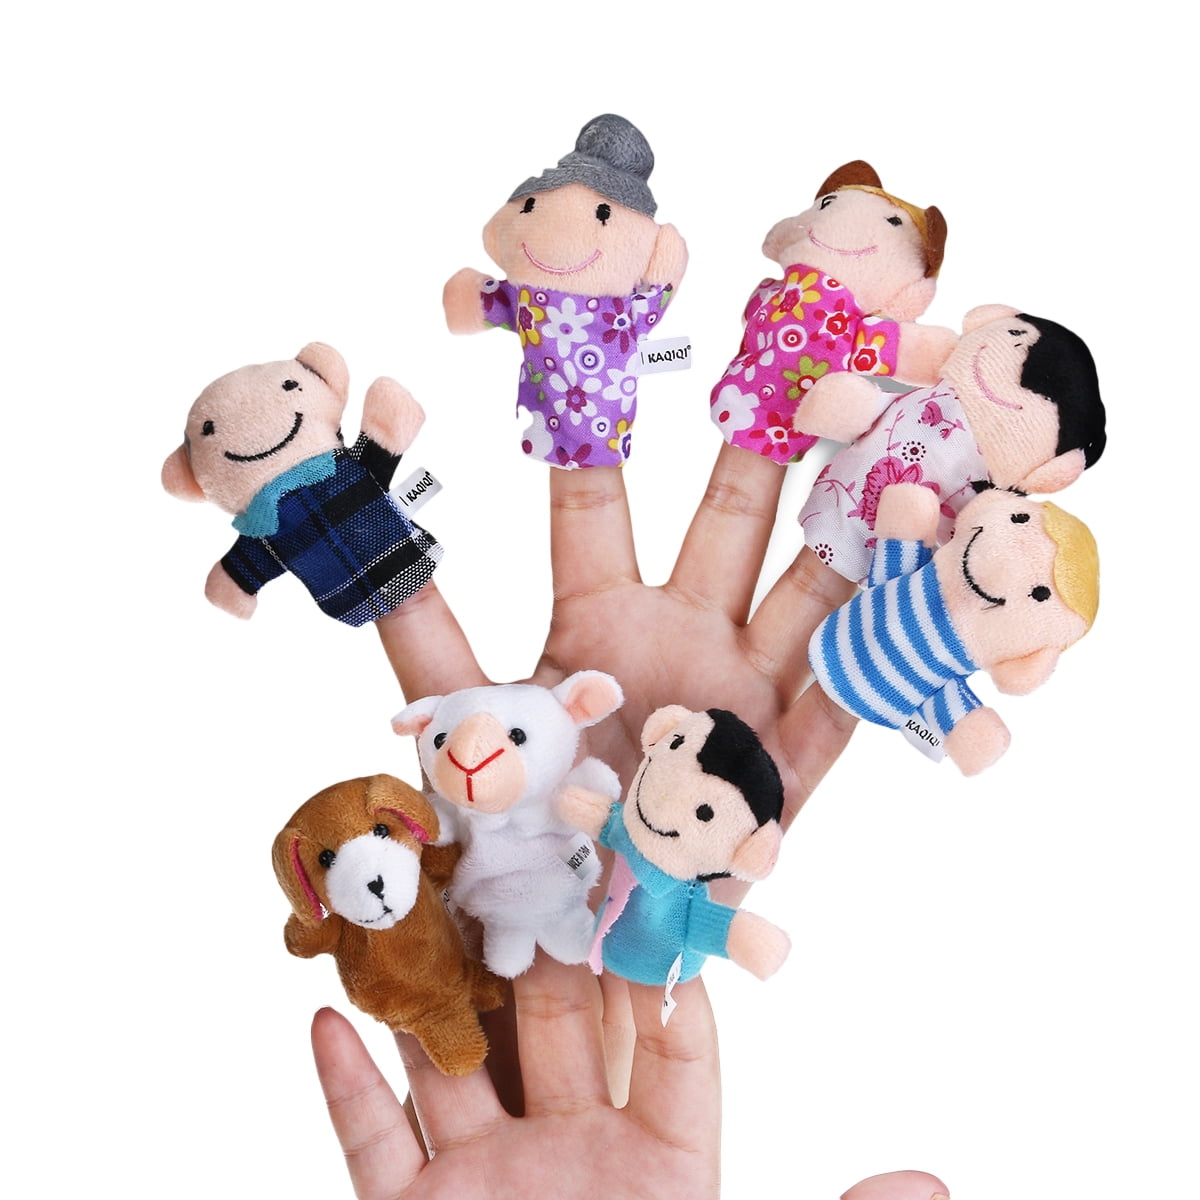 NUOBESTY Animal Finger Puppets Plush Finger Dolls Role Play Storytelling Game Props for Kids Children Story Time Playtime 5Pcs